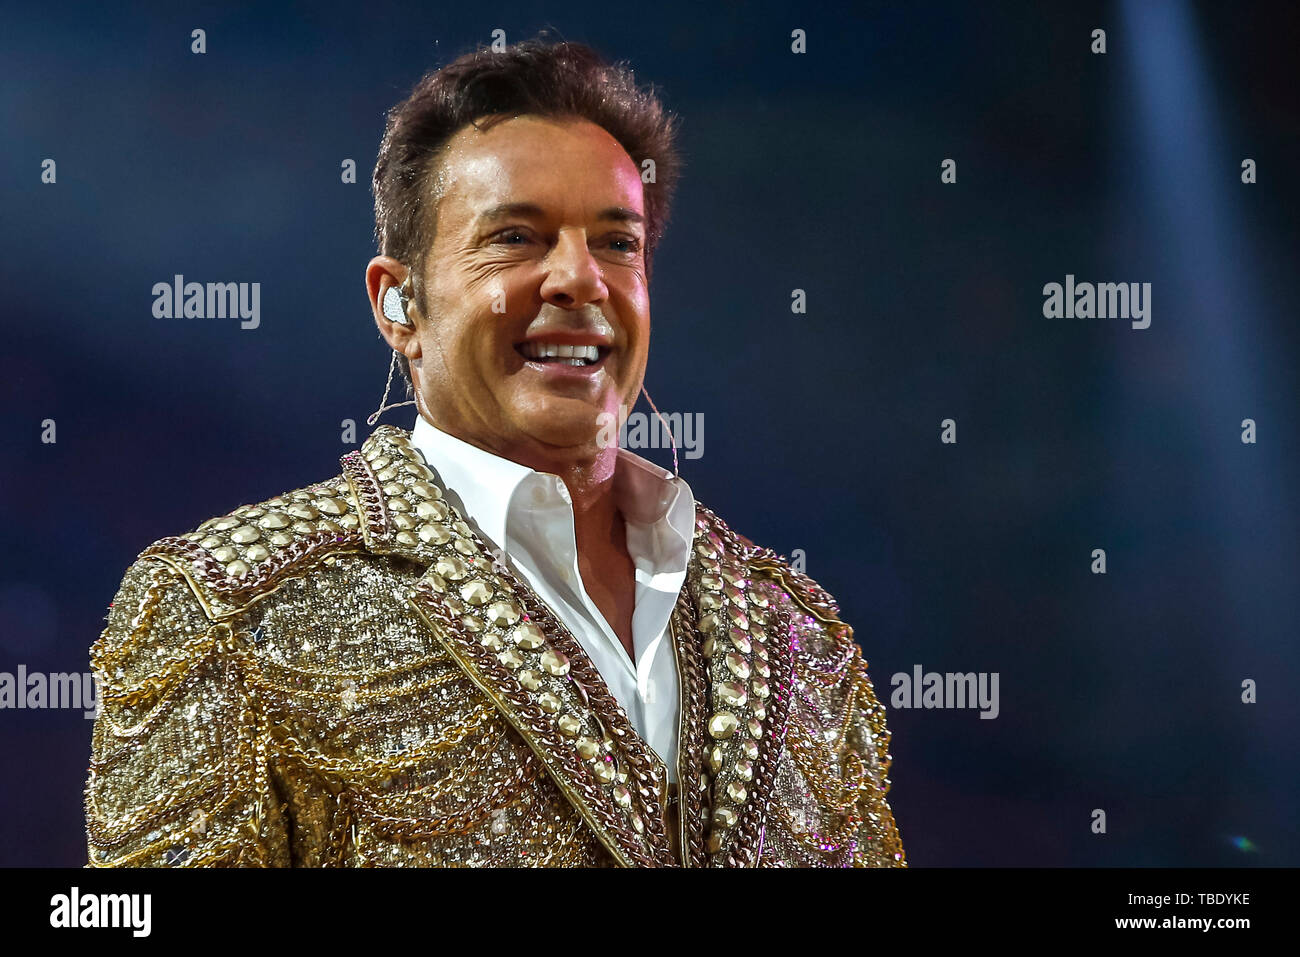 Amsterdam, Netherlands. 31st May, 2019. AMSTERDAM, 31-05-2019, Johan  Cruijff ArenA, Entertainment, Toppers in concert 2019 Happy birthday party. Gerard  Joling Credit: Pro Shots/Alamy Live News Stock Photo - Alamy